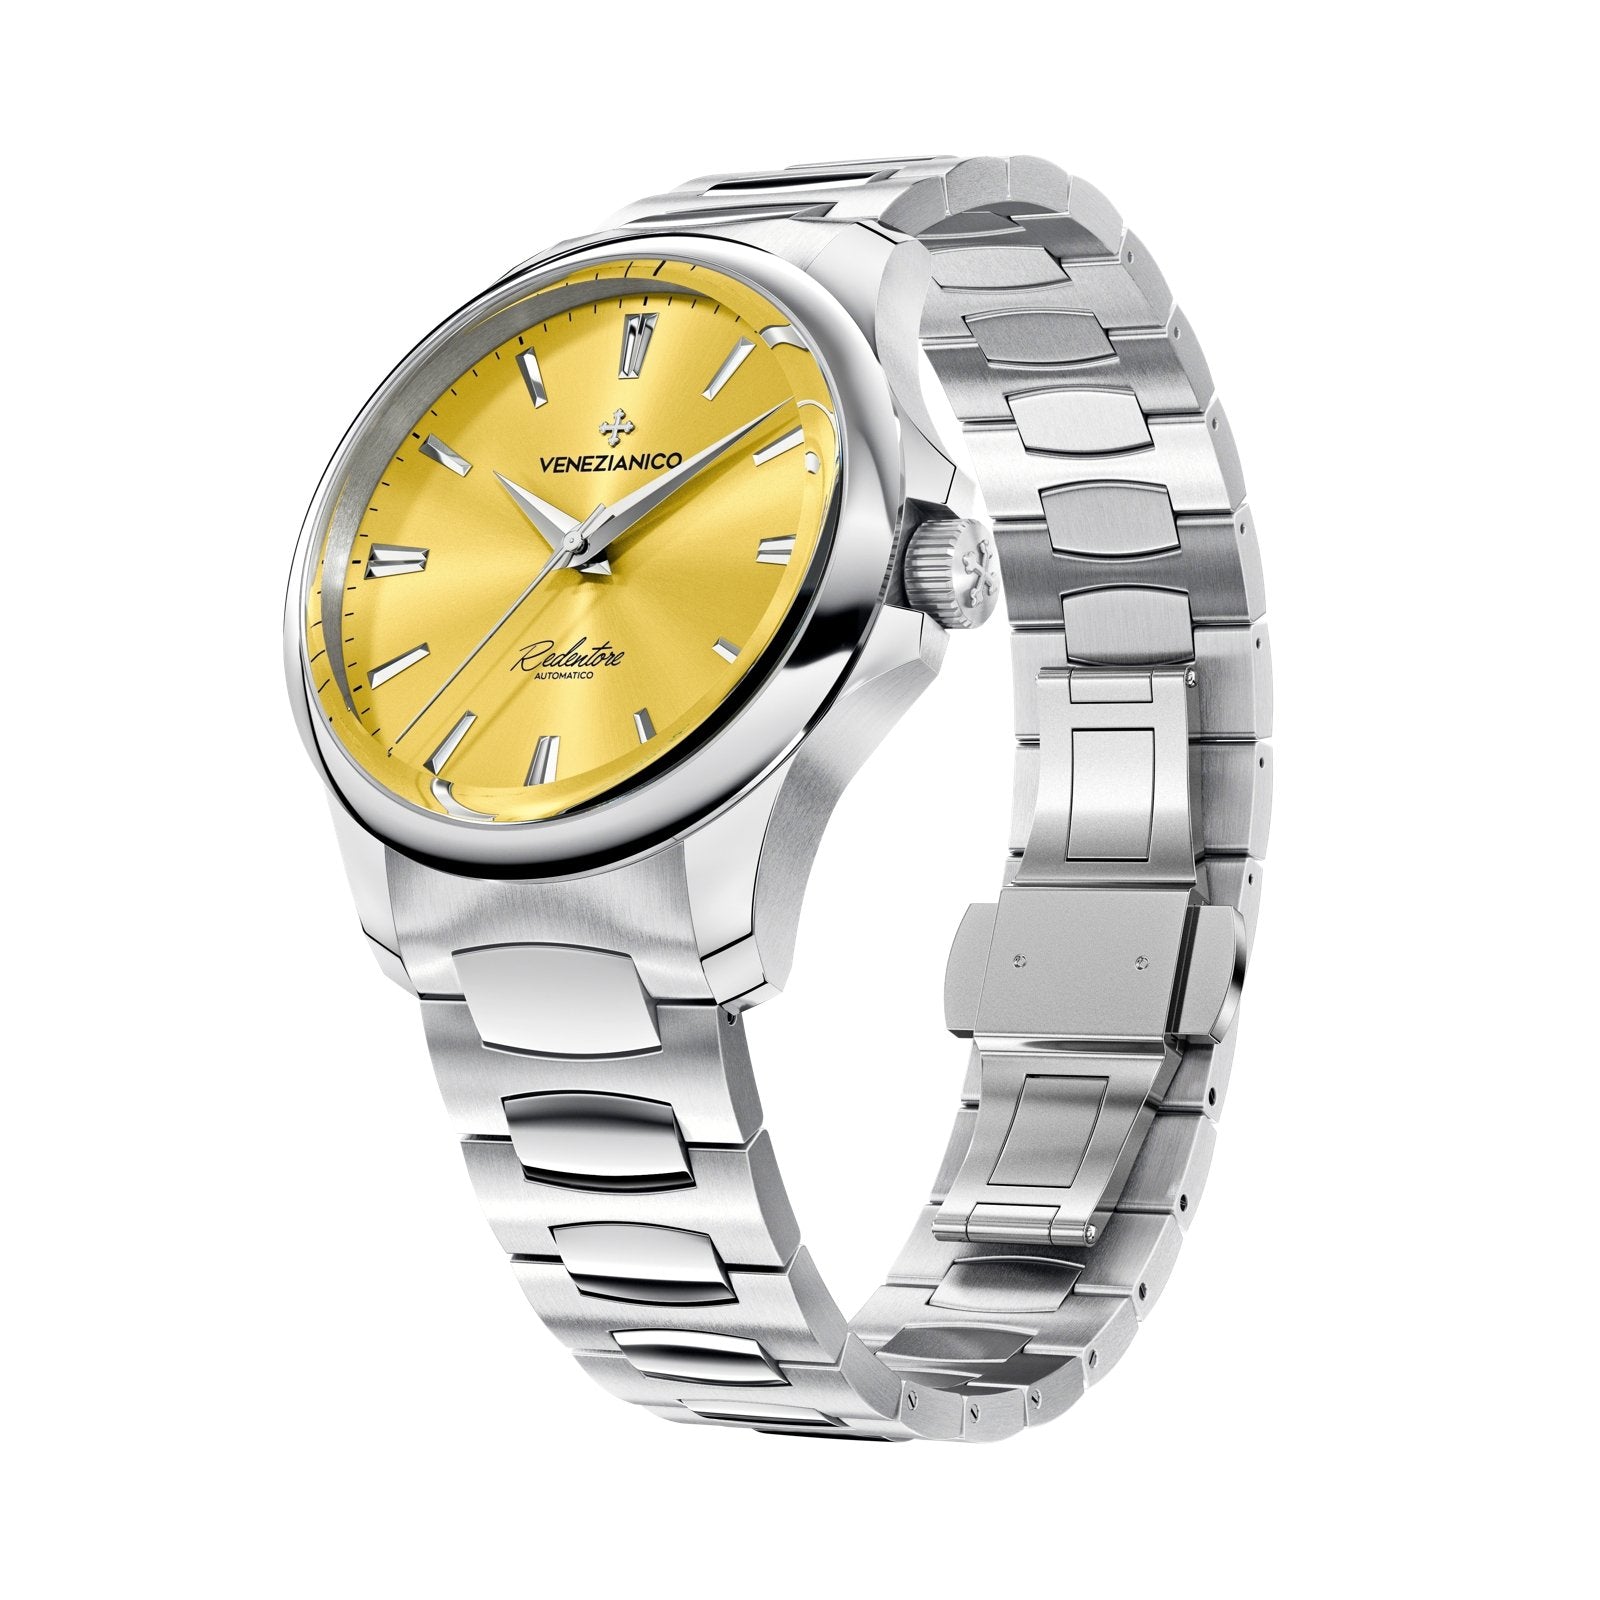 Venezianico Automatic Watch Redentore 36 Yellow Steel 1121501C - Watches & Crystals